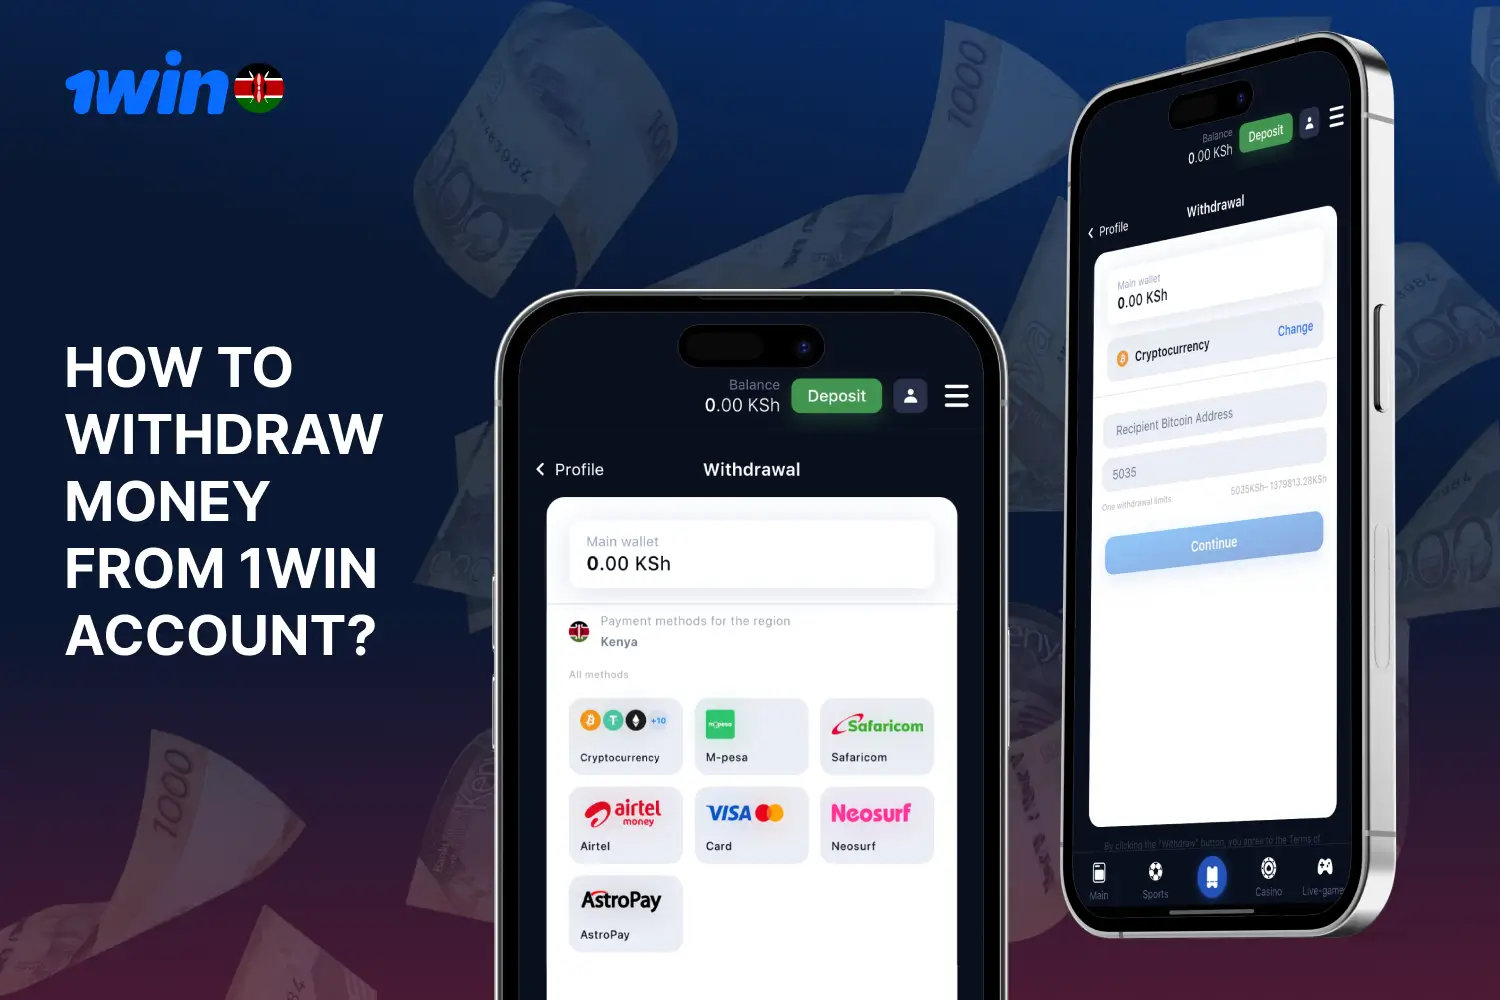 To withdraw money 1win players from Kenya need to follow simple instructions